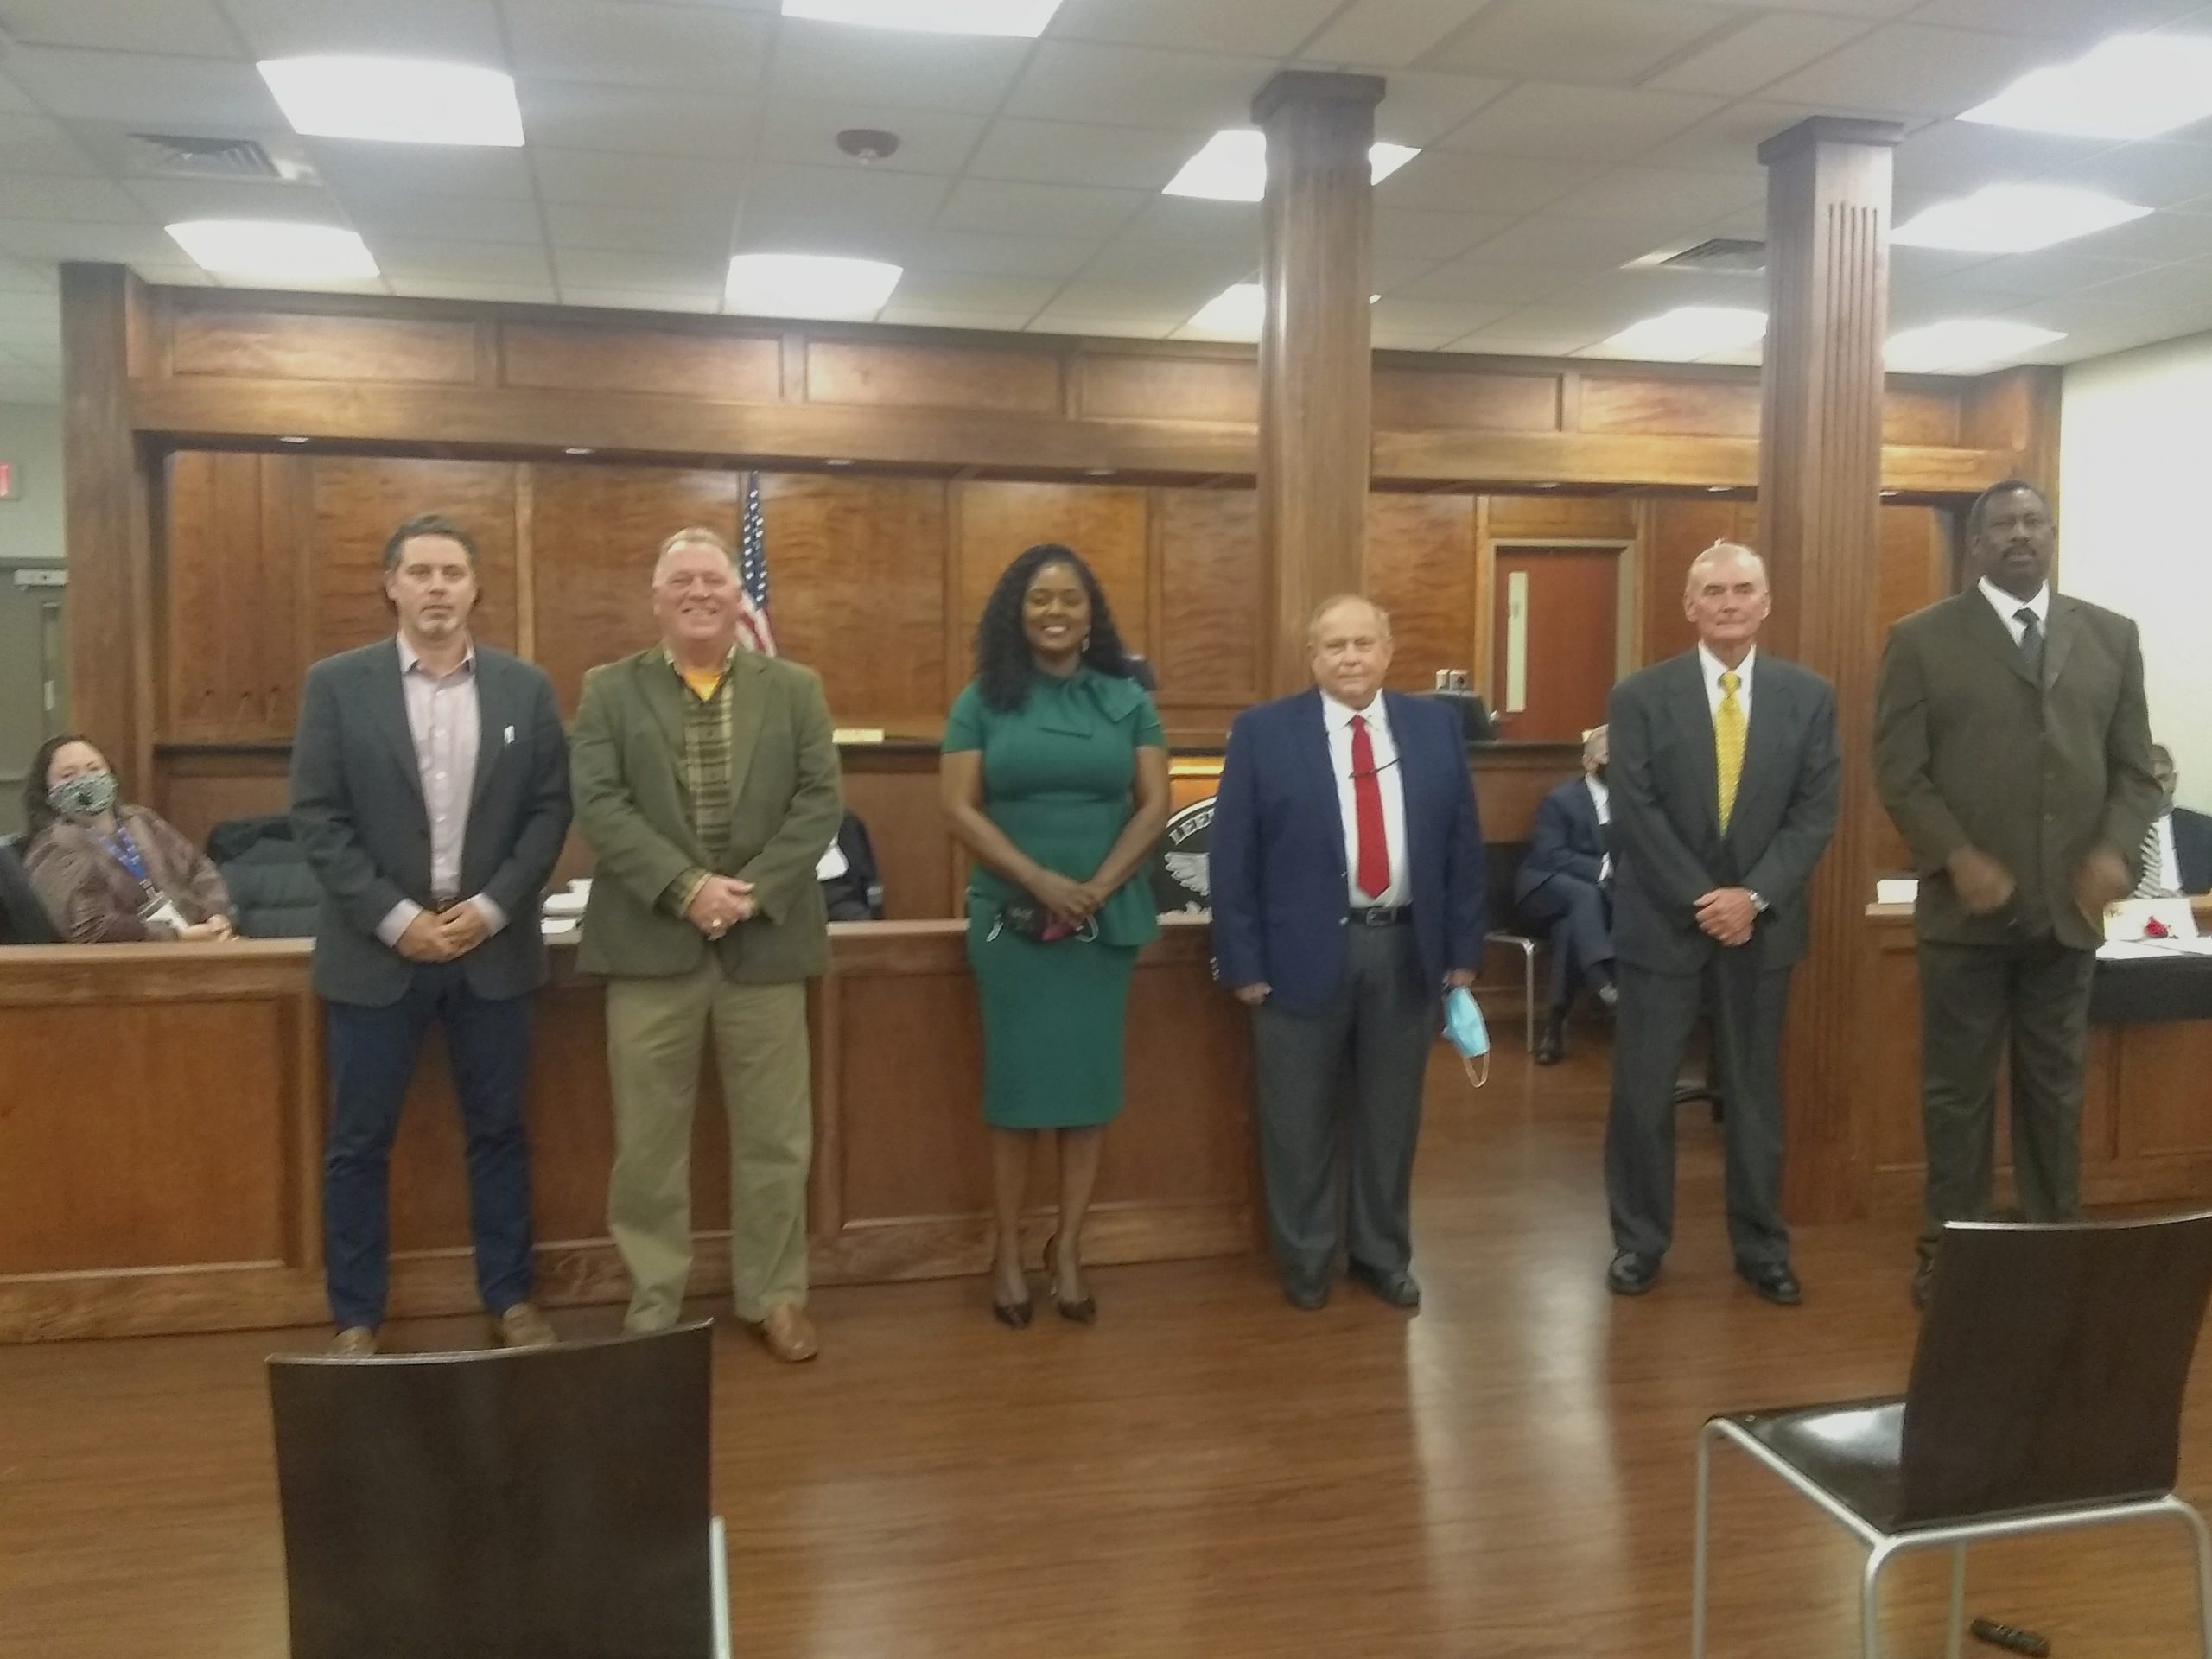 Leeds Council recognizes police officers, announces newly opened district 4 seat